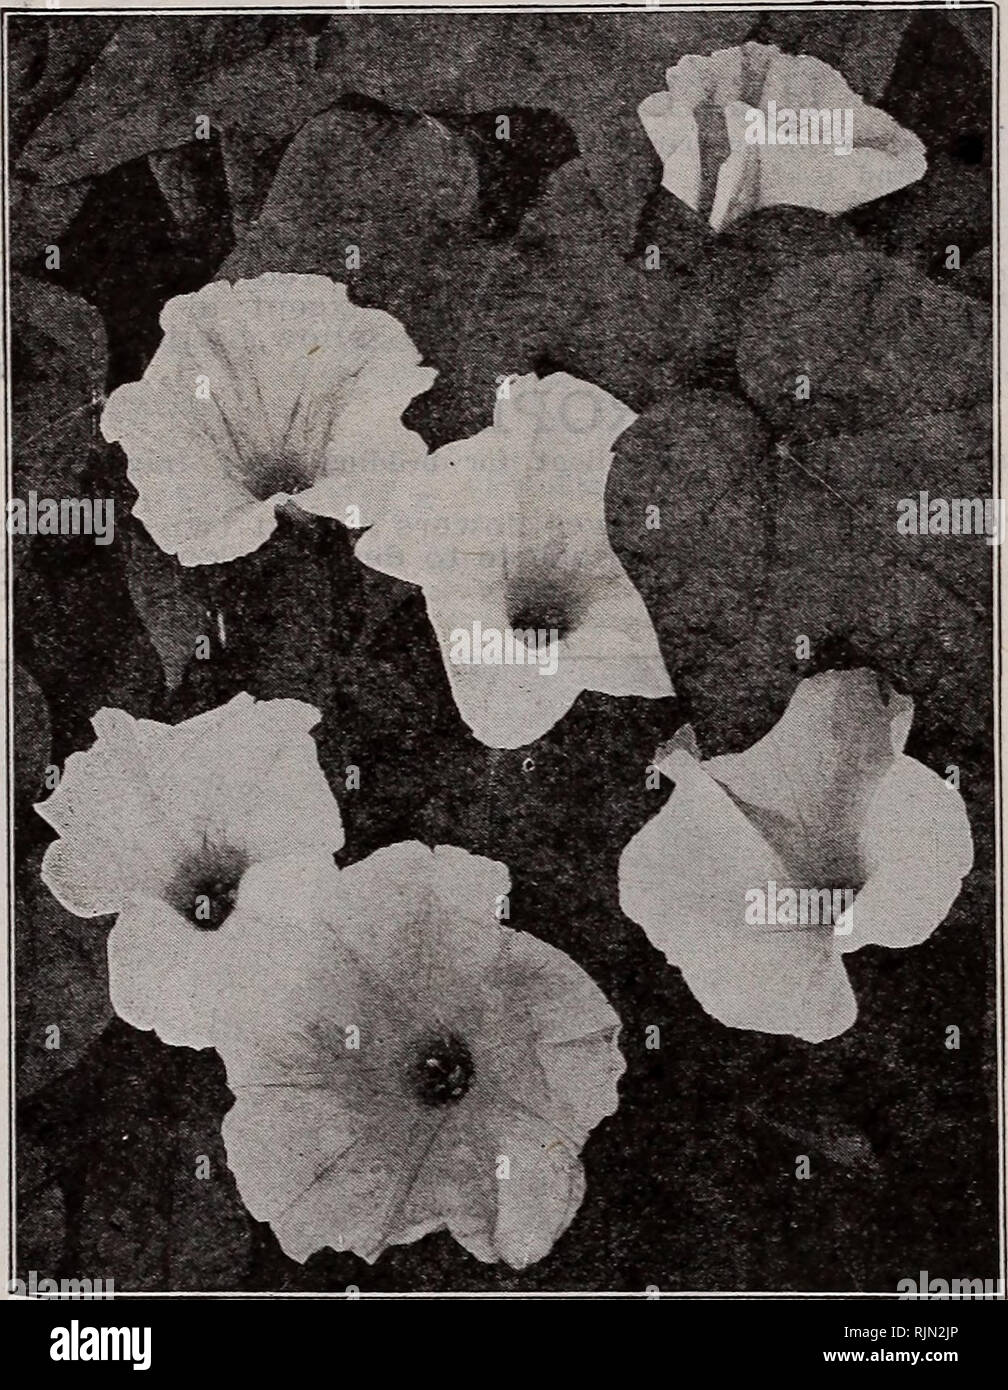 . Barnard's seeds, bulbs, shrubs 1922. Seeds Catalogs; Vegetables Seeds Catalogs; Flowers Seeds Catalogs; Fruit Seeds Catalogs; Nurseries (Horticulture) Catalogs. 60 The W. W. Barnard Co., 231-235 W. Madison St., Chicago ICE PLANT Tender annual of drooping habit. Useful in baskets and vases. Has peculiar leaves covered with small pustules. 3155âCrystallinum. Fine for pots 10c IMPATIENS (Zanzibar Balsam) G. P. 1 foot. Valuable for pot culture as well as bedding. The delicate flowers are very pretty and constantly in bloom. 3160â Holstii. Vermilion 10c 3161â Sultani. Bright rose 10c 3166âSultani Stock Photo